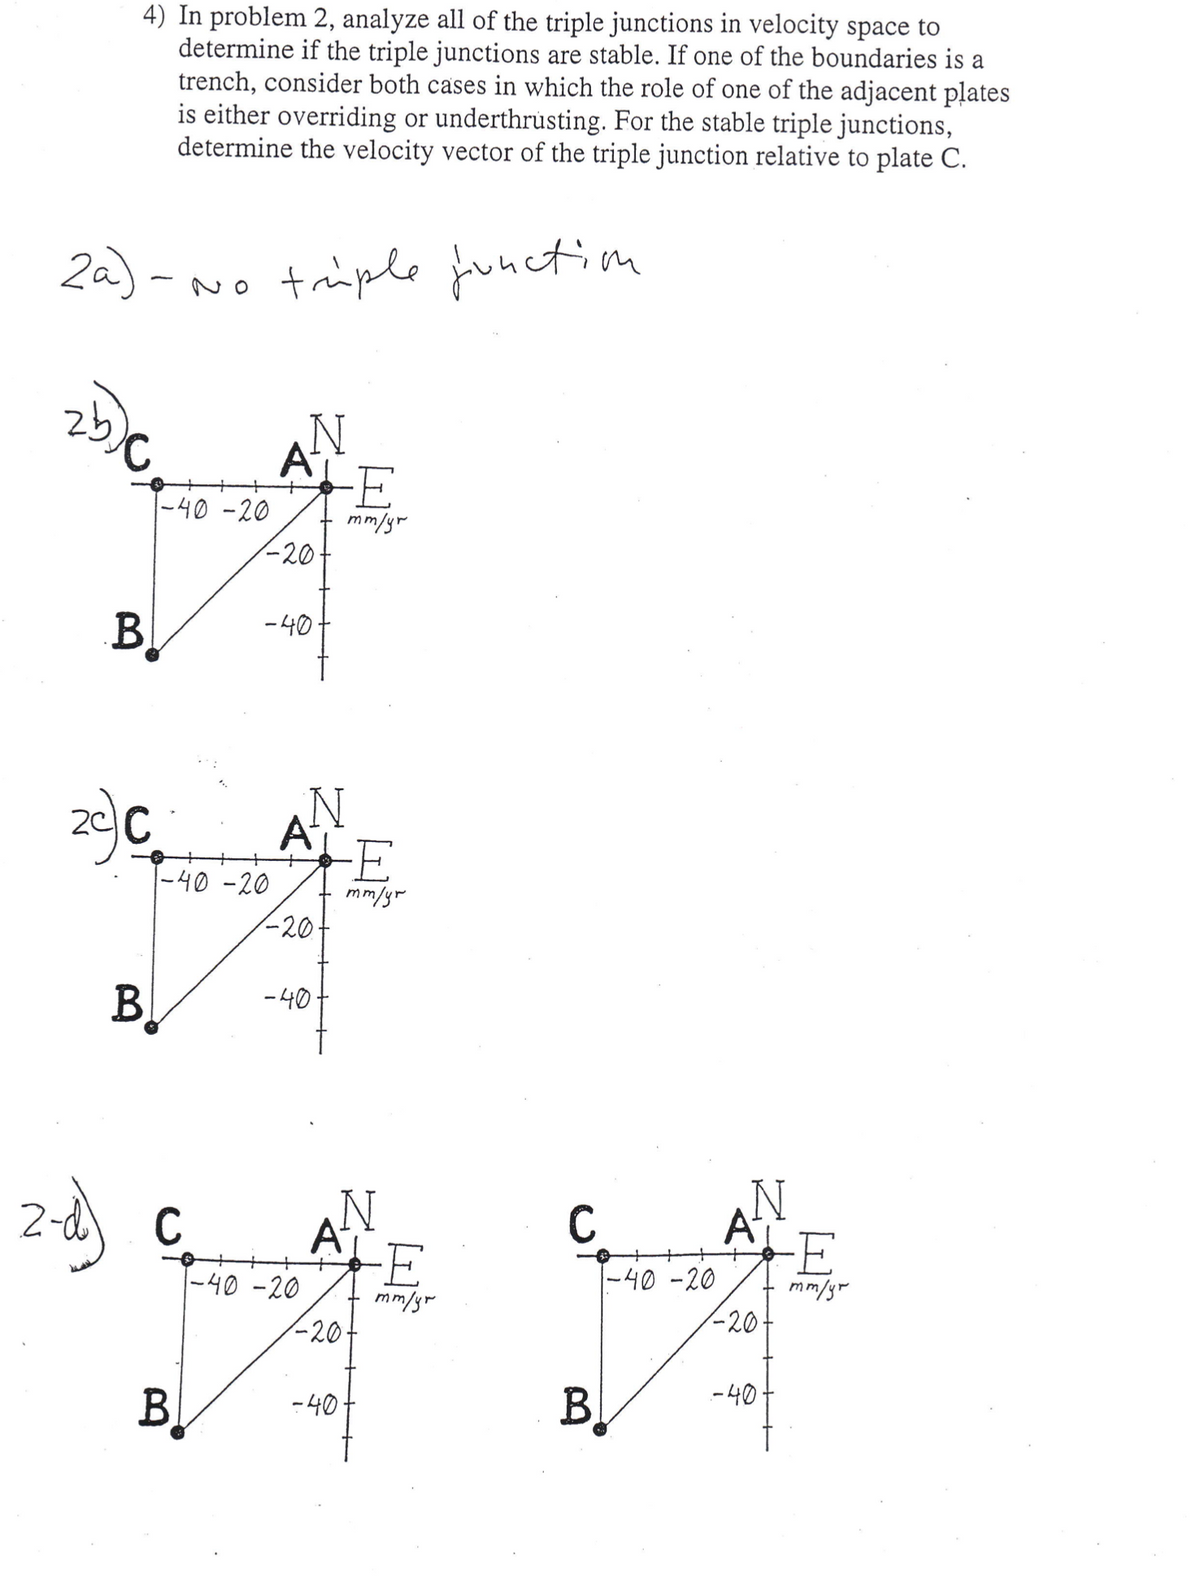 4) In problem 2, analyze all of the triple junctions in velocity space to
determine if the triple junctions are stable. If one of the boundaries is a
trench, consider both cases in which the role of one of the adjacent plates
is either overriding or underthrusting. For the stable triple junctions,
determine the velocity vector of the triple junction relative to plate C.
2a) - No triple function
N
1-40-20
B
ze) c
B
2-d)
1-40 -20
C
B
A
-20
-40
-20
-40
-40-20
-E
mm/yr
E
mm/yr
N
ALE
--20-
-40
mm/yr
C
B
1-40-20
N
A₁₁
-20.
-40
-E
mm/yr